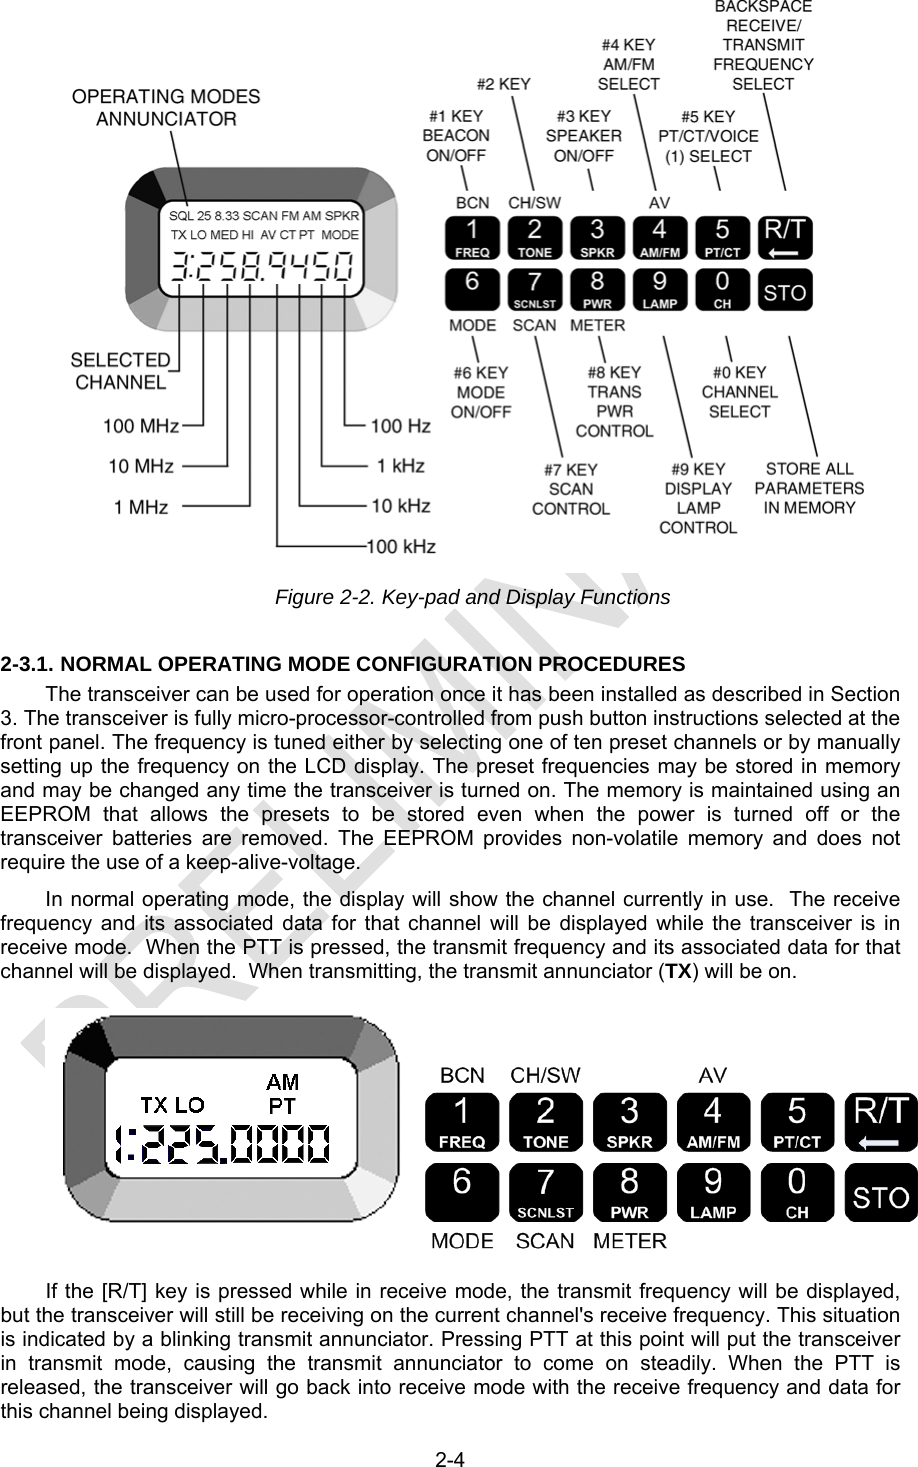  2-4  Figure 2-2. Key-pad and Display Functions  2-3.1. NORMAL OPERATING MODE CONFIGURATION PROCEDURES The transceiver can be used for operation once it has been installed as described in Section 3. The transceiver is fully micro-processor-controlled from push button instructions selected at the front panel. The frequency is tuned either by selecting one of ten preset channels or by manually setting up the frequency on the LCD display. The preset frequencies may be stored in memory and may be changed any time the transceiver is turned on. The memory is maintained using an EEPROM that allows the presets to be stored even when the power is turned off or the transceiver batteries are removed. The EEPROM provides non-volatile memory and does not require the use of a keep-alive-voltage. In normal operating mode, the display will show the channel currently in use.  The receive frequency and its associated data for that channel will be displayed while the transceiver is in receive mode.  When the PTT is pressed, the transmit frequency and its associated data for that channel will be displayed.  When transmitting, the transmit annunciator (TX) will be on.  If the [R/T] key is pressed while in receive mode, the transmit frequency will be displayed, but the transceiver will still be receiving on the current channel&apos;s receive frequency. This situation is indicated by a blinking transmit annunciator. Pressing PTT at this point will put the transceiver in transmit mode, causing the transmit annunciator to come on steadily. When the PTT is released, the transceiver will go back into receive mode with the receive frequency and data for this channel being displayed. 